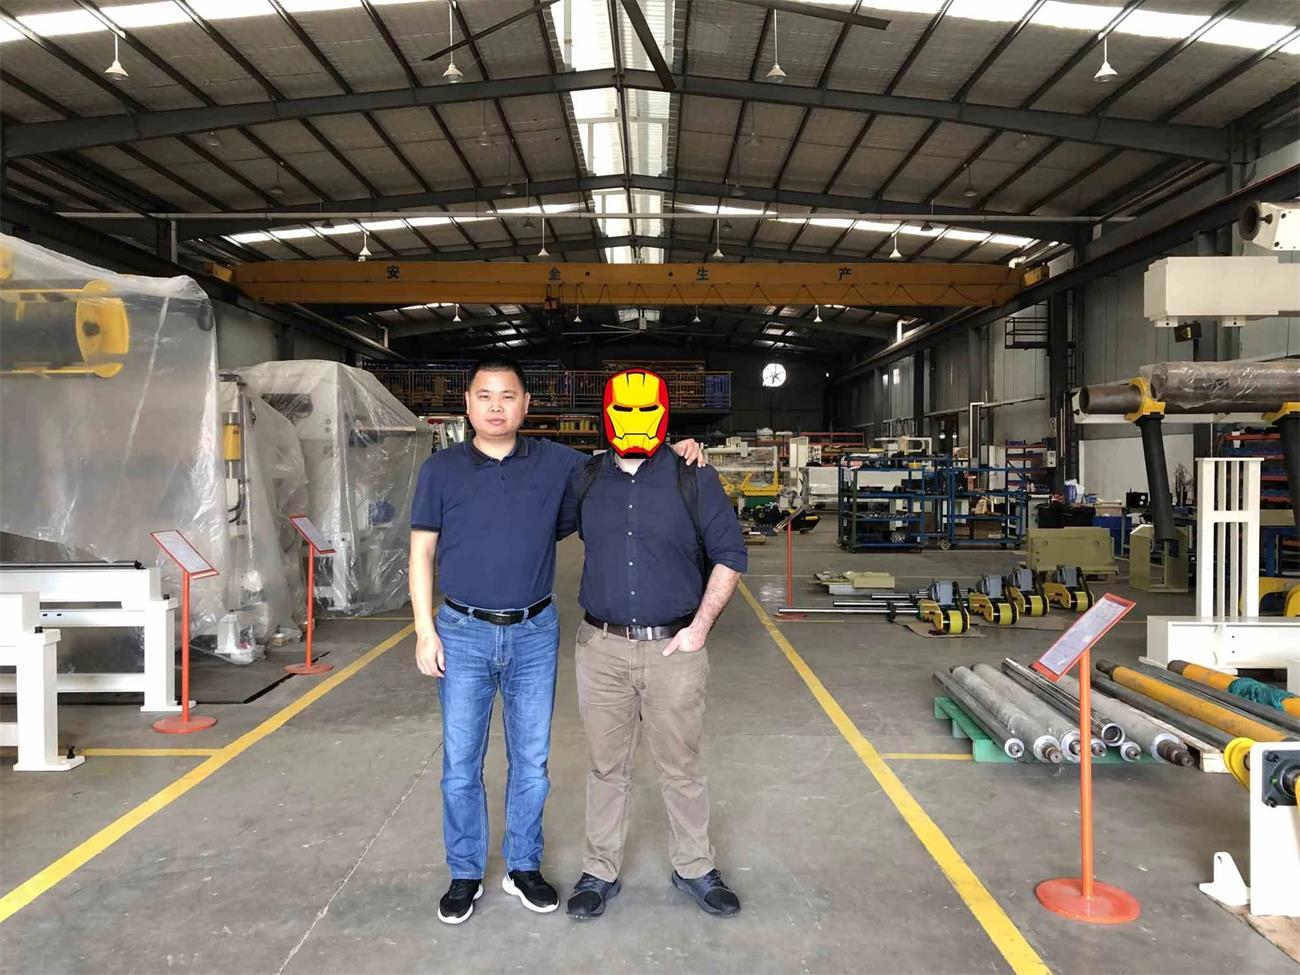 The Customer from Portugal visit our factory for inspection of 3 in 1 coil feeder